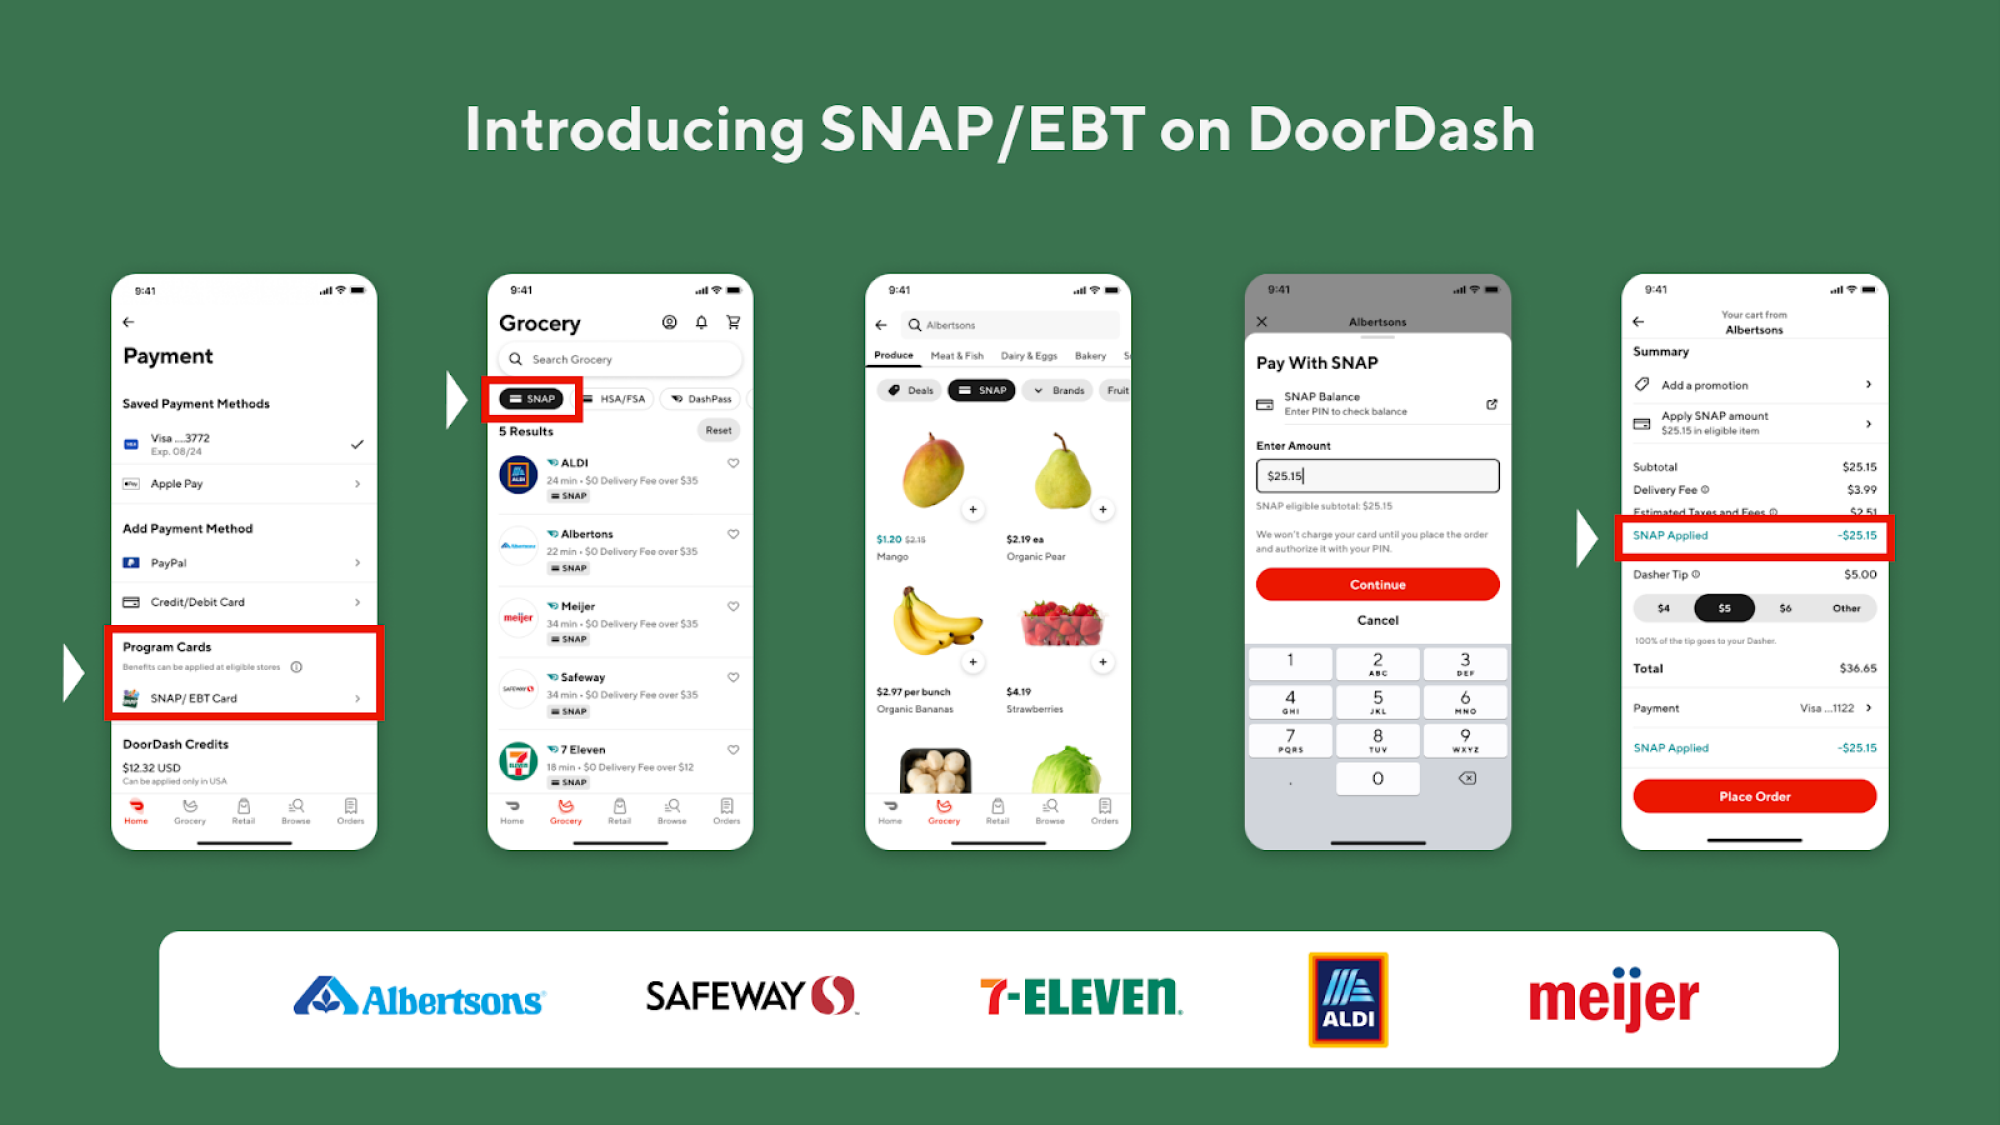 Five screenshots of the DoorDash app showing the new EBT card options while placing an order. 